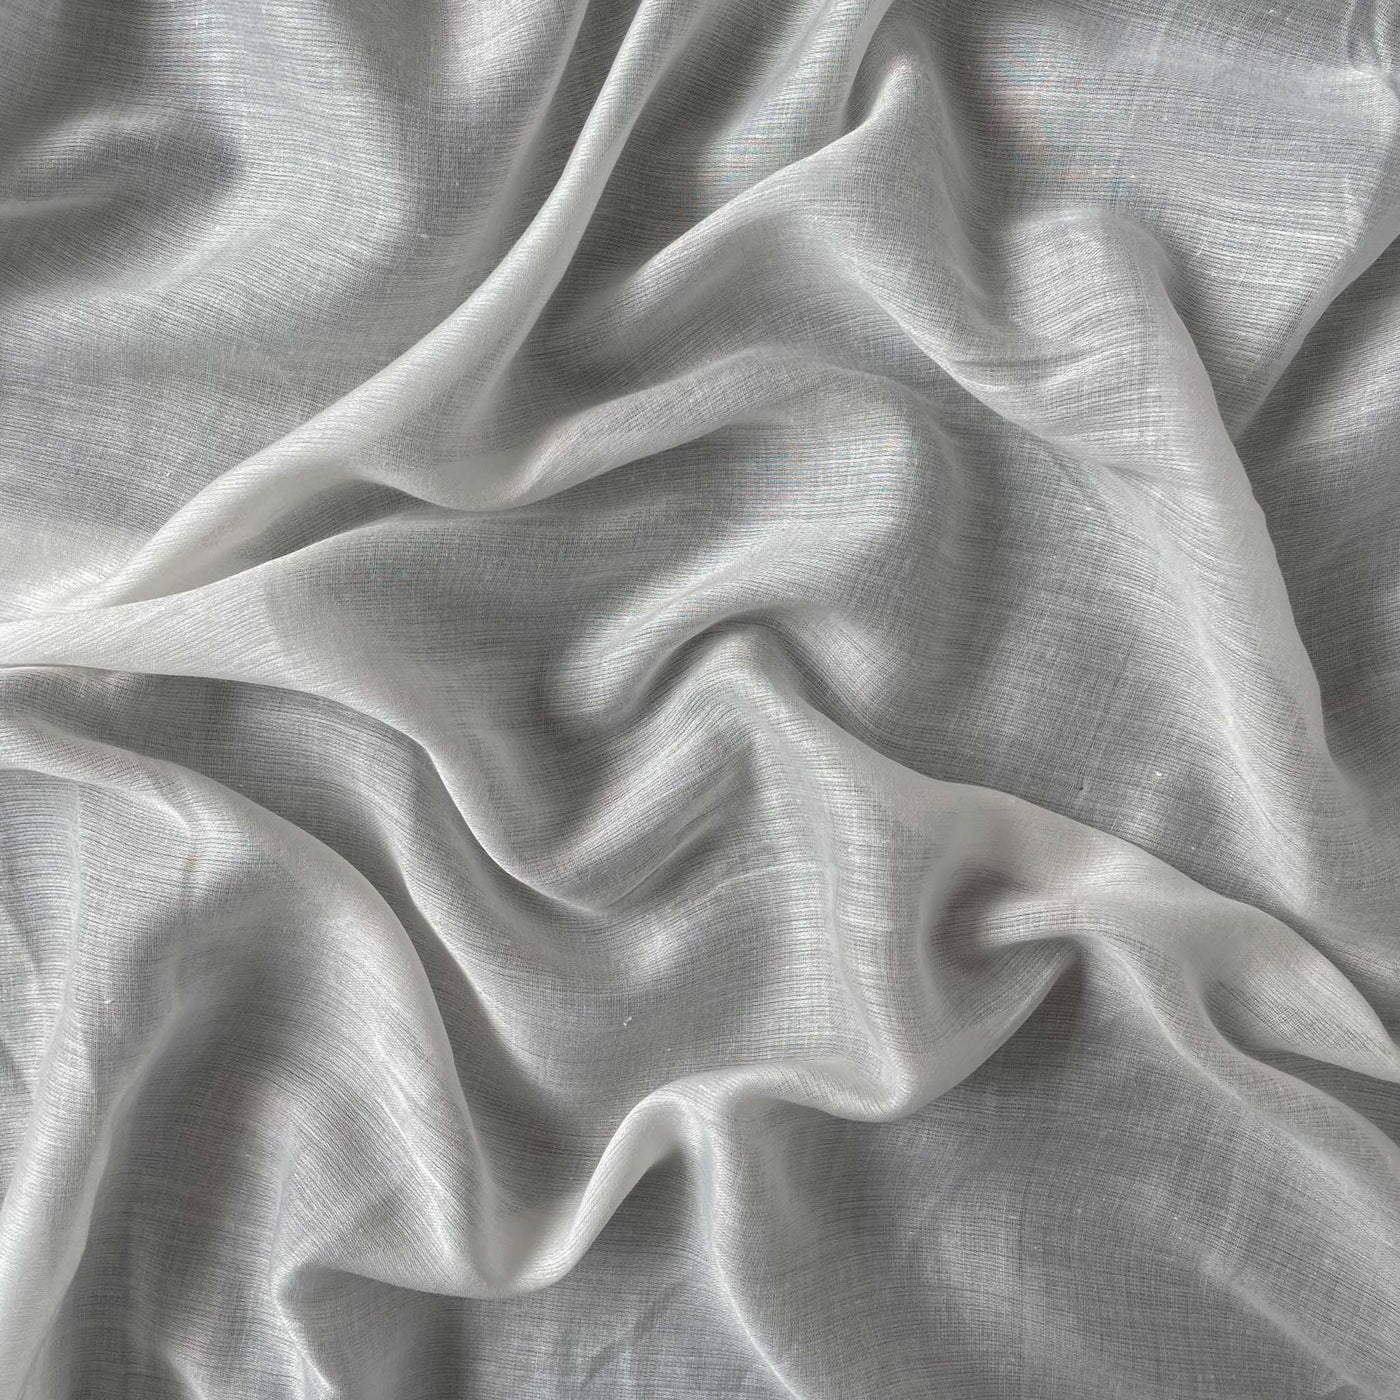 Fabric Pandit Fabric White Dyeable Pure Lawn Cotton Satin Plain Fabric (Width 44 Inches, 62 gms)